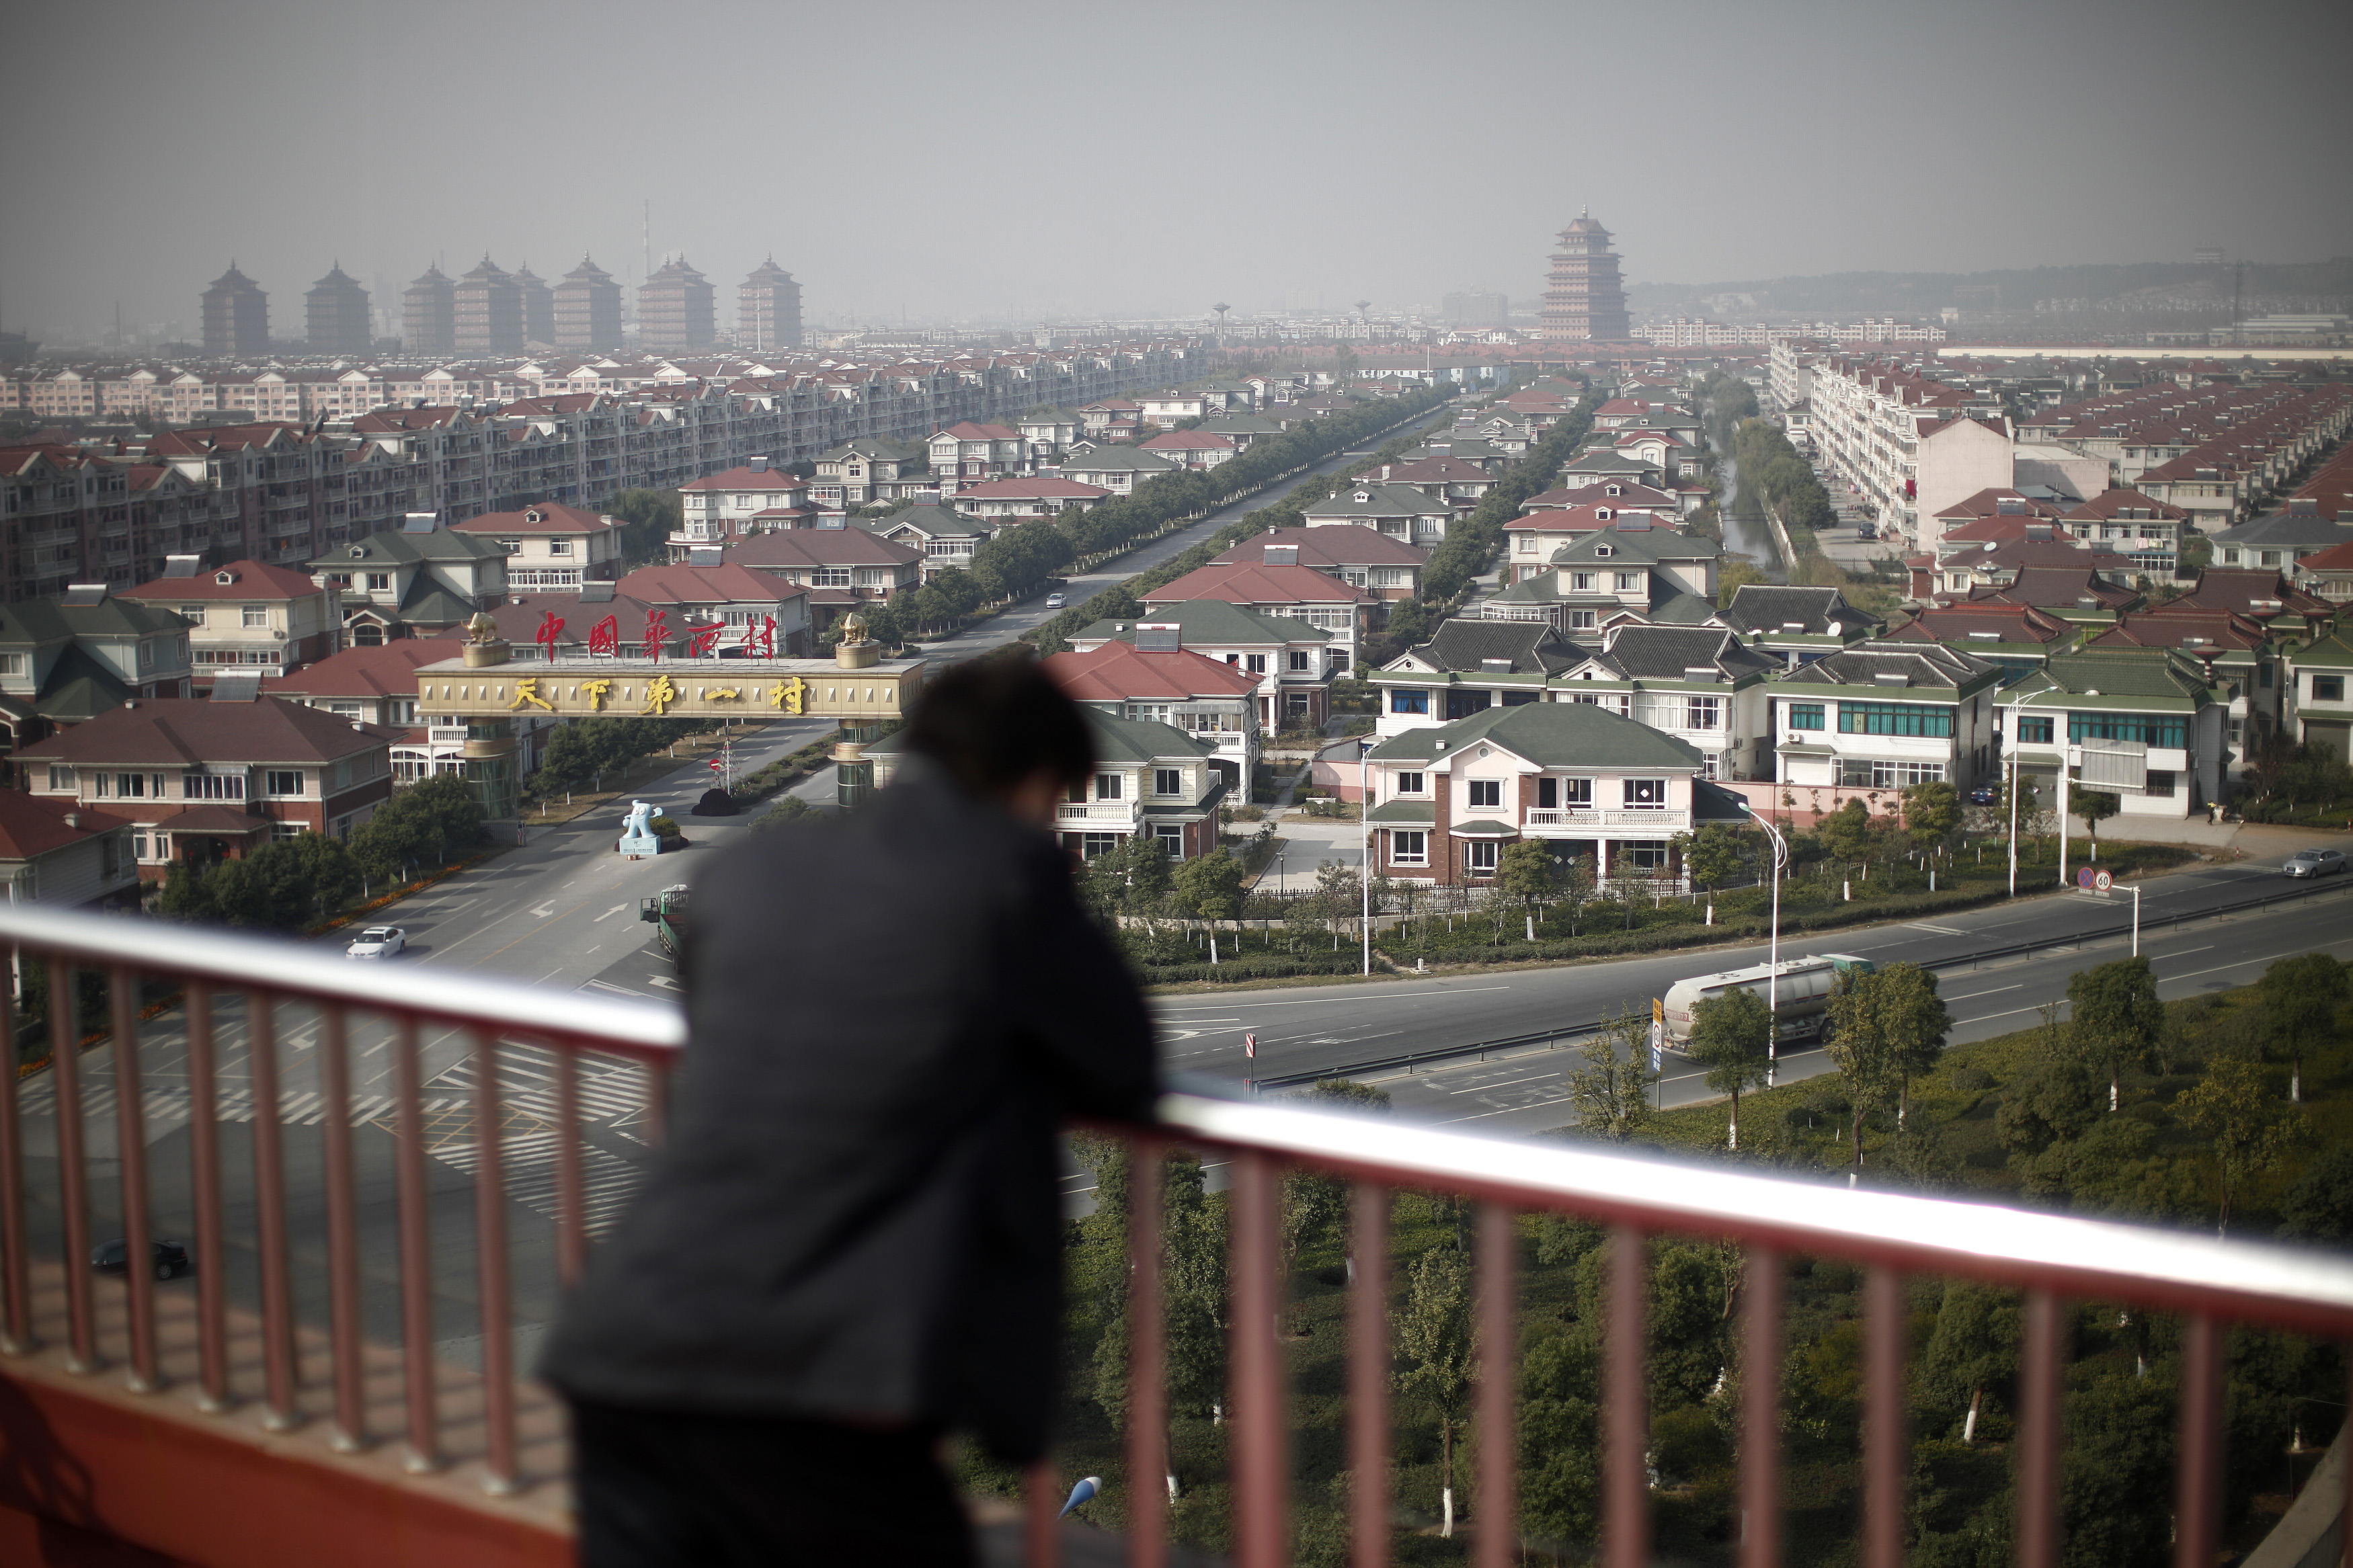 A man watches the Huaxi village, at Jiangsu province December 2, 2010. In China's richest village of Huaxi, a booming market town of 36,000 in the affluent eastern province of Jiangsu, every family has at least one house, two cars and
$250,000 in the bank. Officials from elsewhere in China tour Huaxi to find out how this once sleepy village, just 576 residents in the 1950s, is now so rich and
 why non-local businessmen would donate million-dollar factories to buy the privilege of a local residence permit. Picture taken December 2, 2010.  REUTERS/Carlos Barria  (CHINA - Tags: POLITICS BUSINESS SOCIETY) - RTXVCES